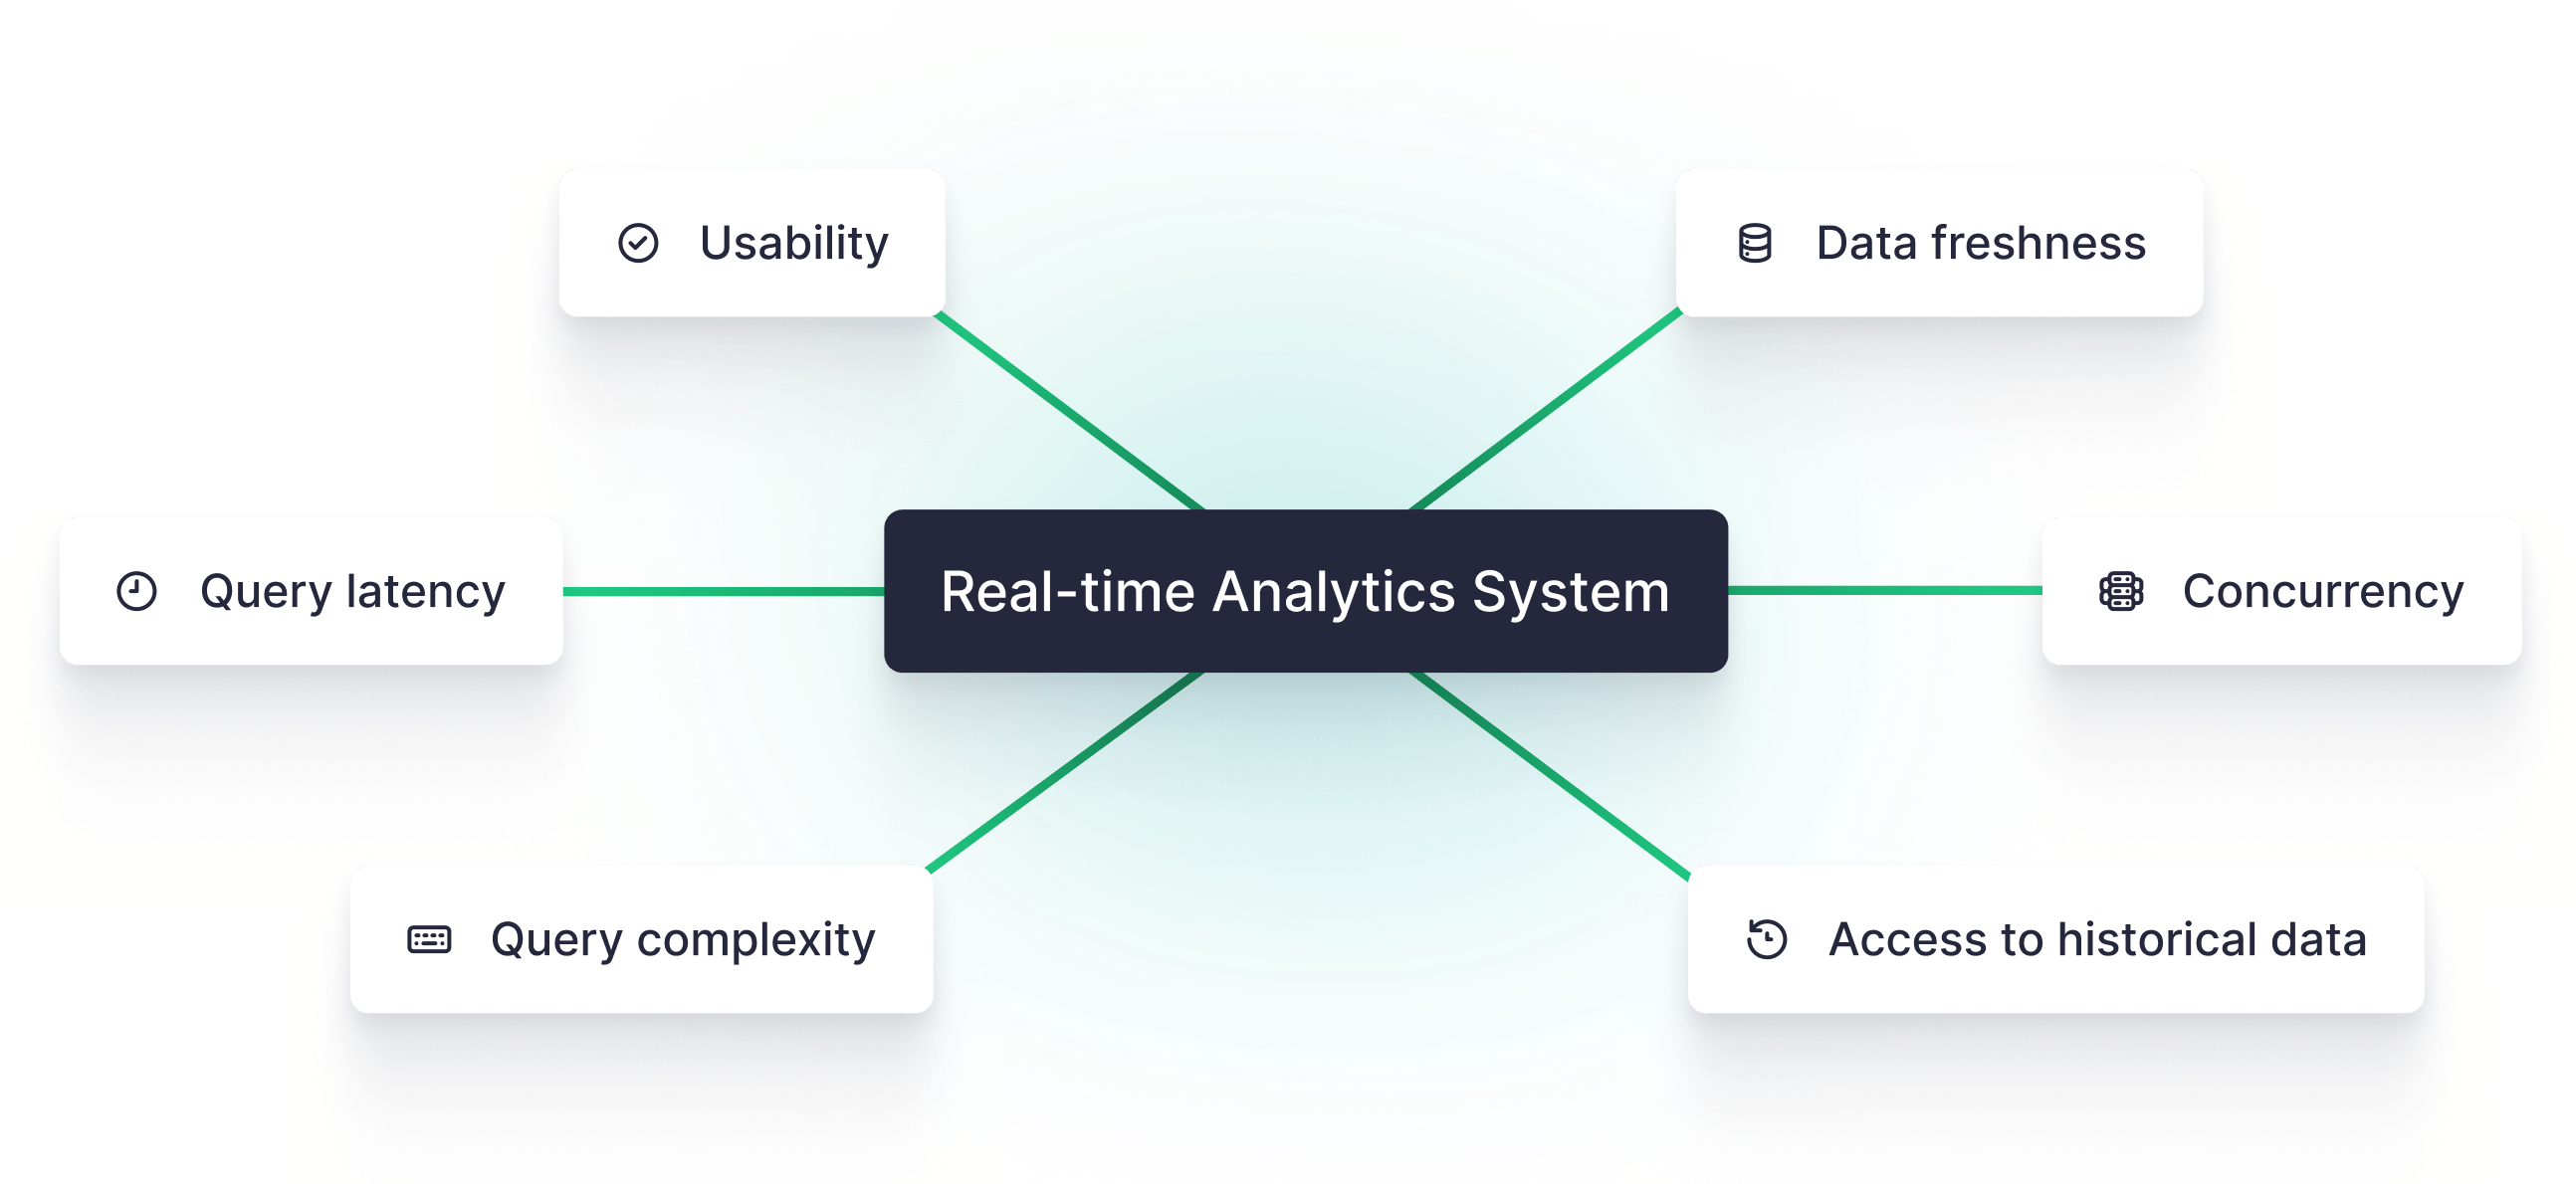 How to scale a real-time data platform